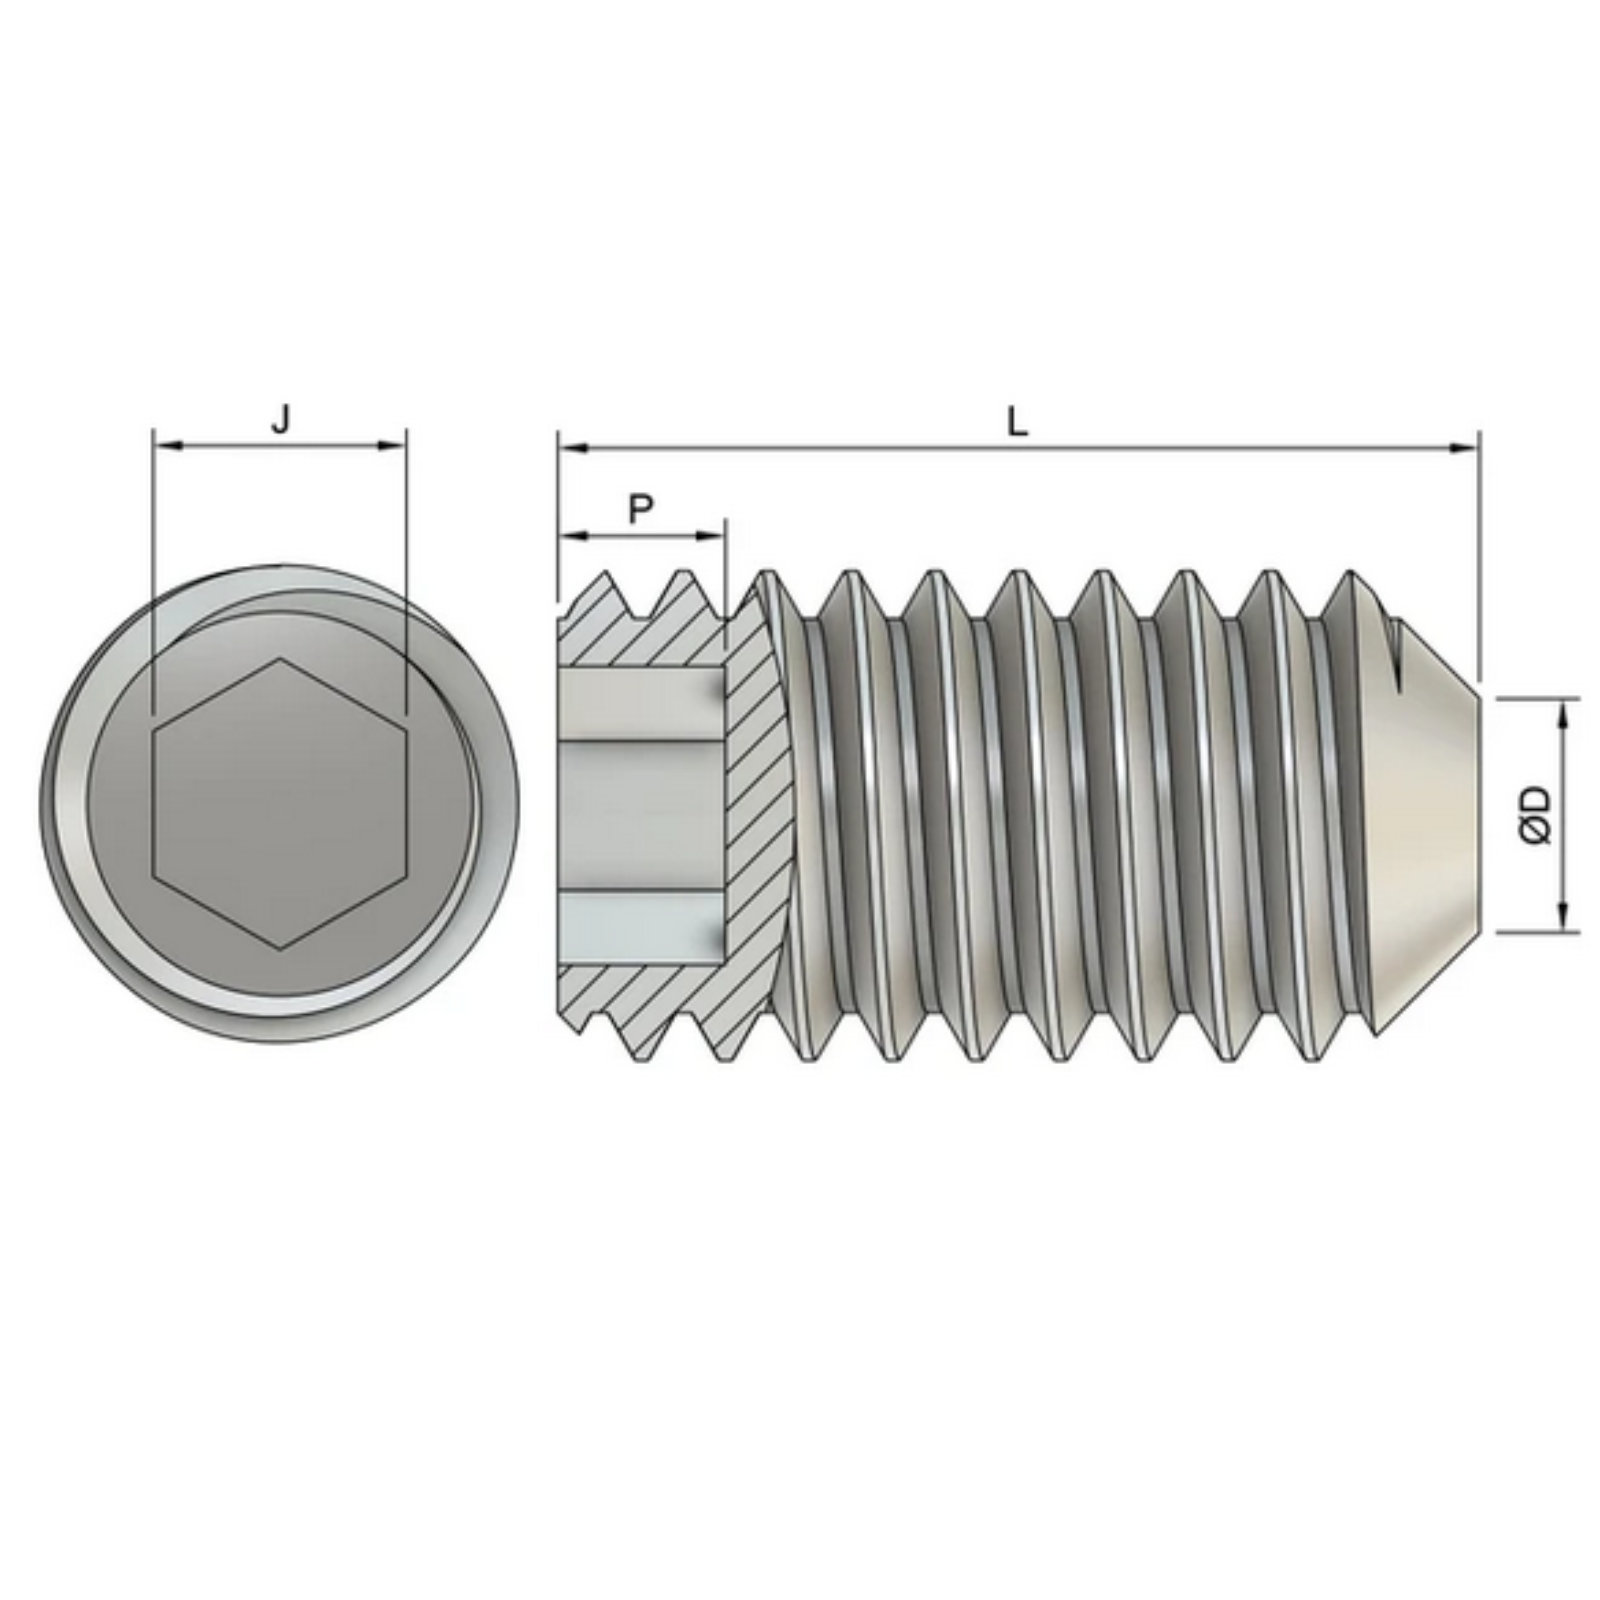 M5 Cup Point Set / Grub Screws (DIN 916) - Stainless Steel (A2)